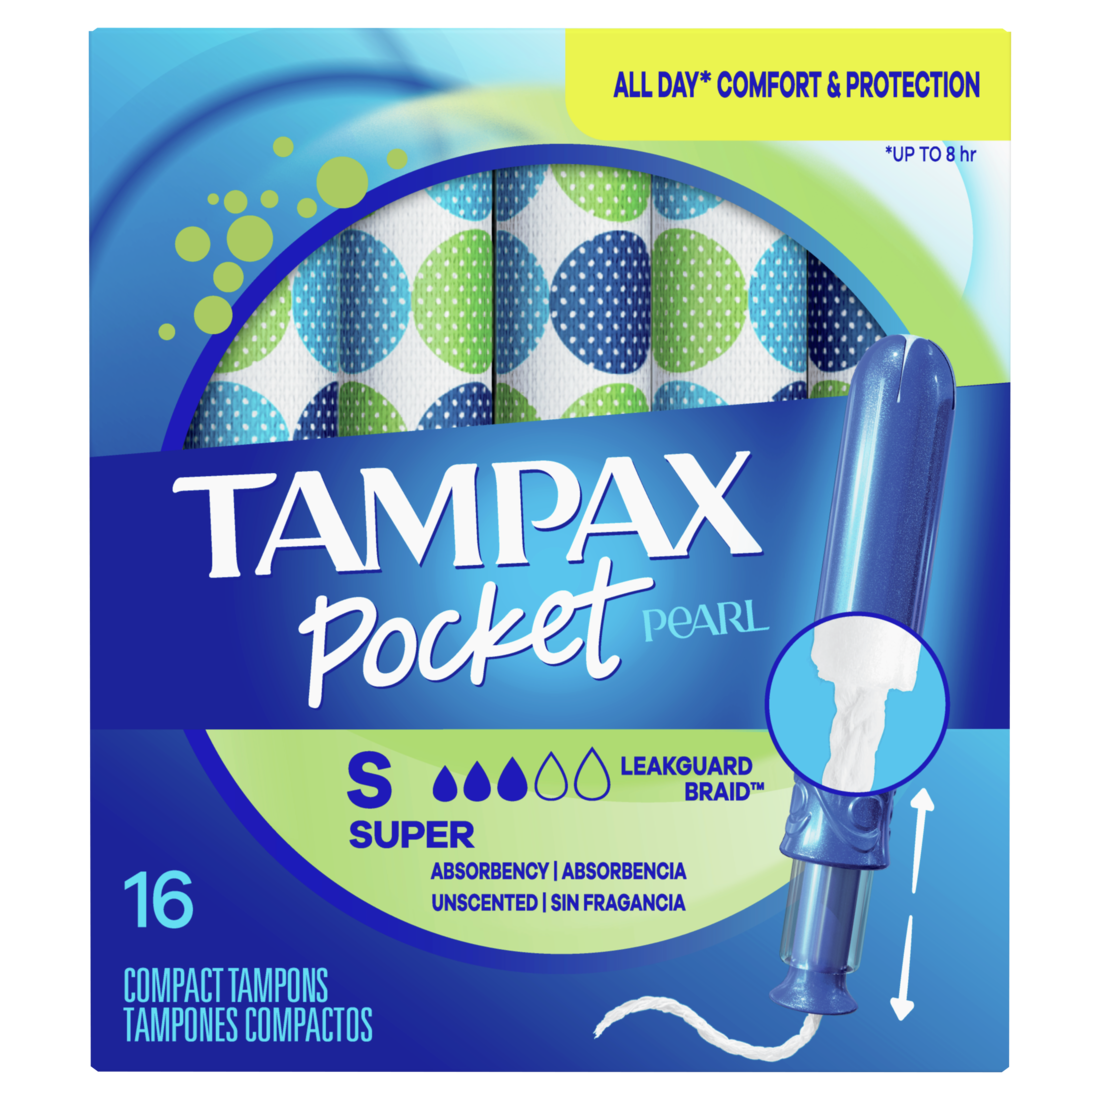 Tampax Pocket Pearl Compact Tampons Super Absorbency Unscented - 16ct/18pk